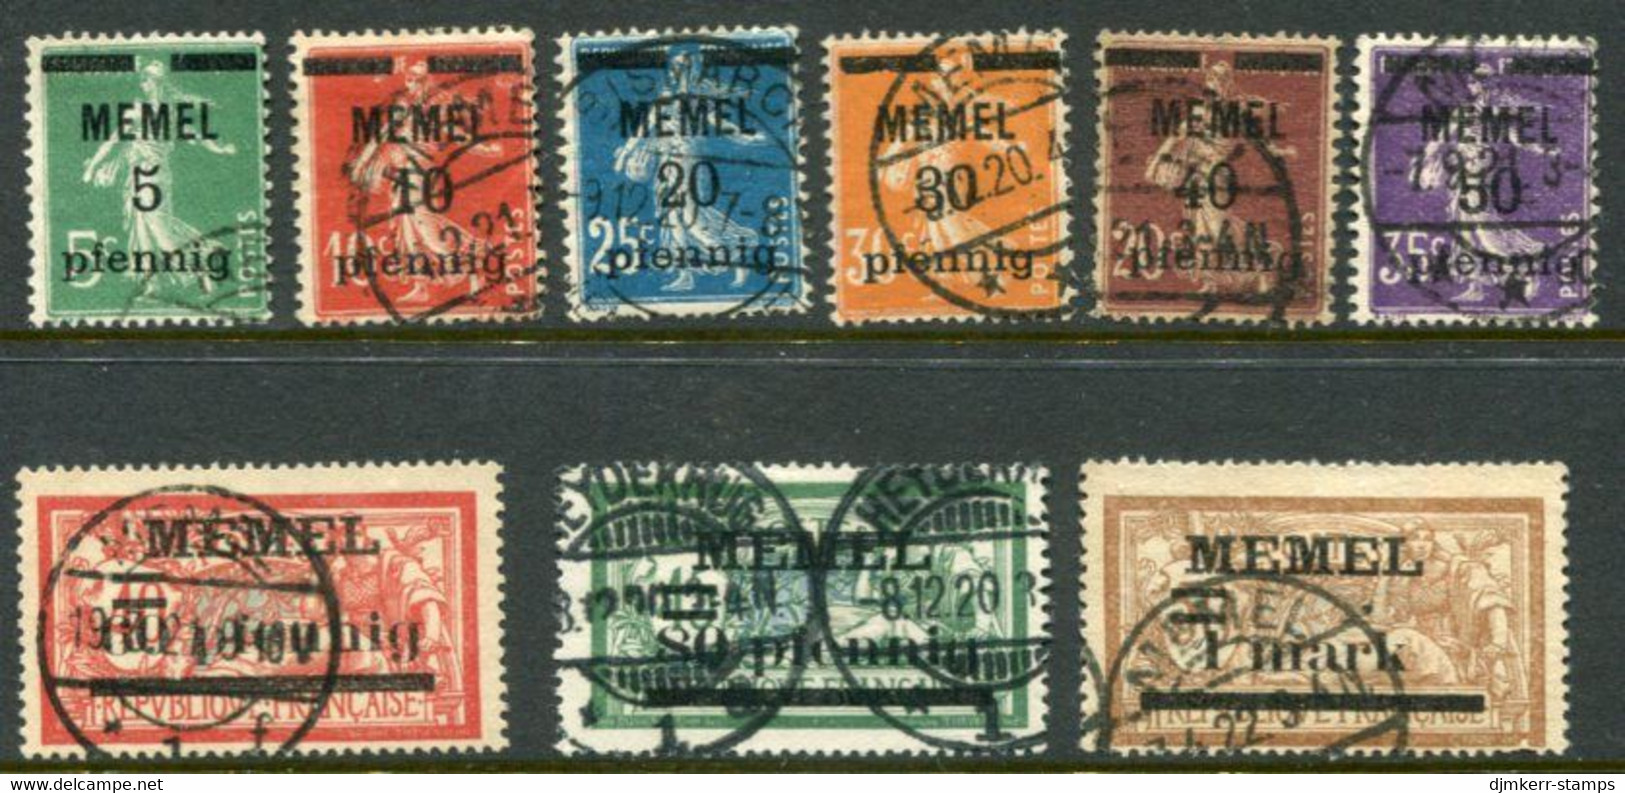 MEMEL 1920 Surcharges On France To 1 Mk. Used.  Michel 18-26 - Memelland 1923